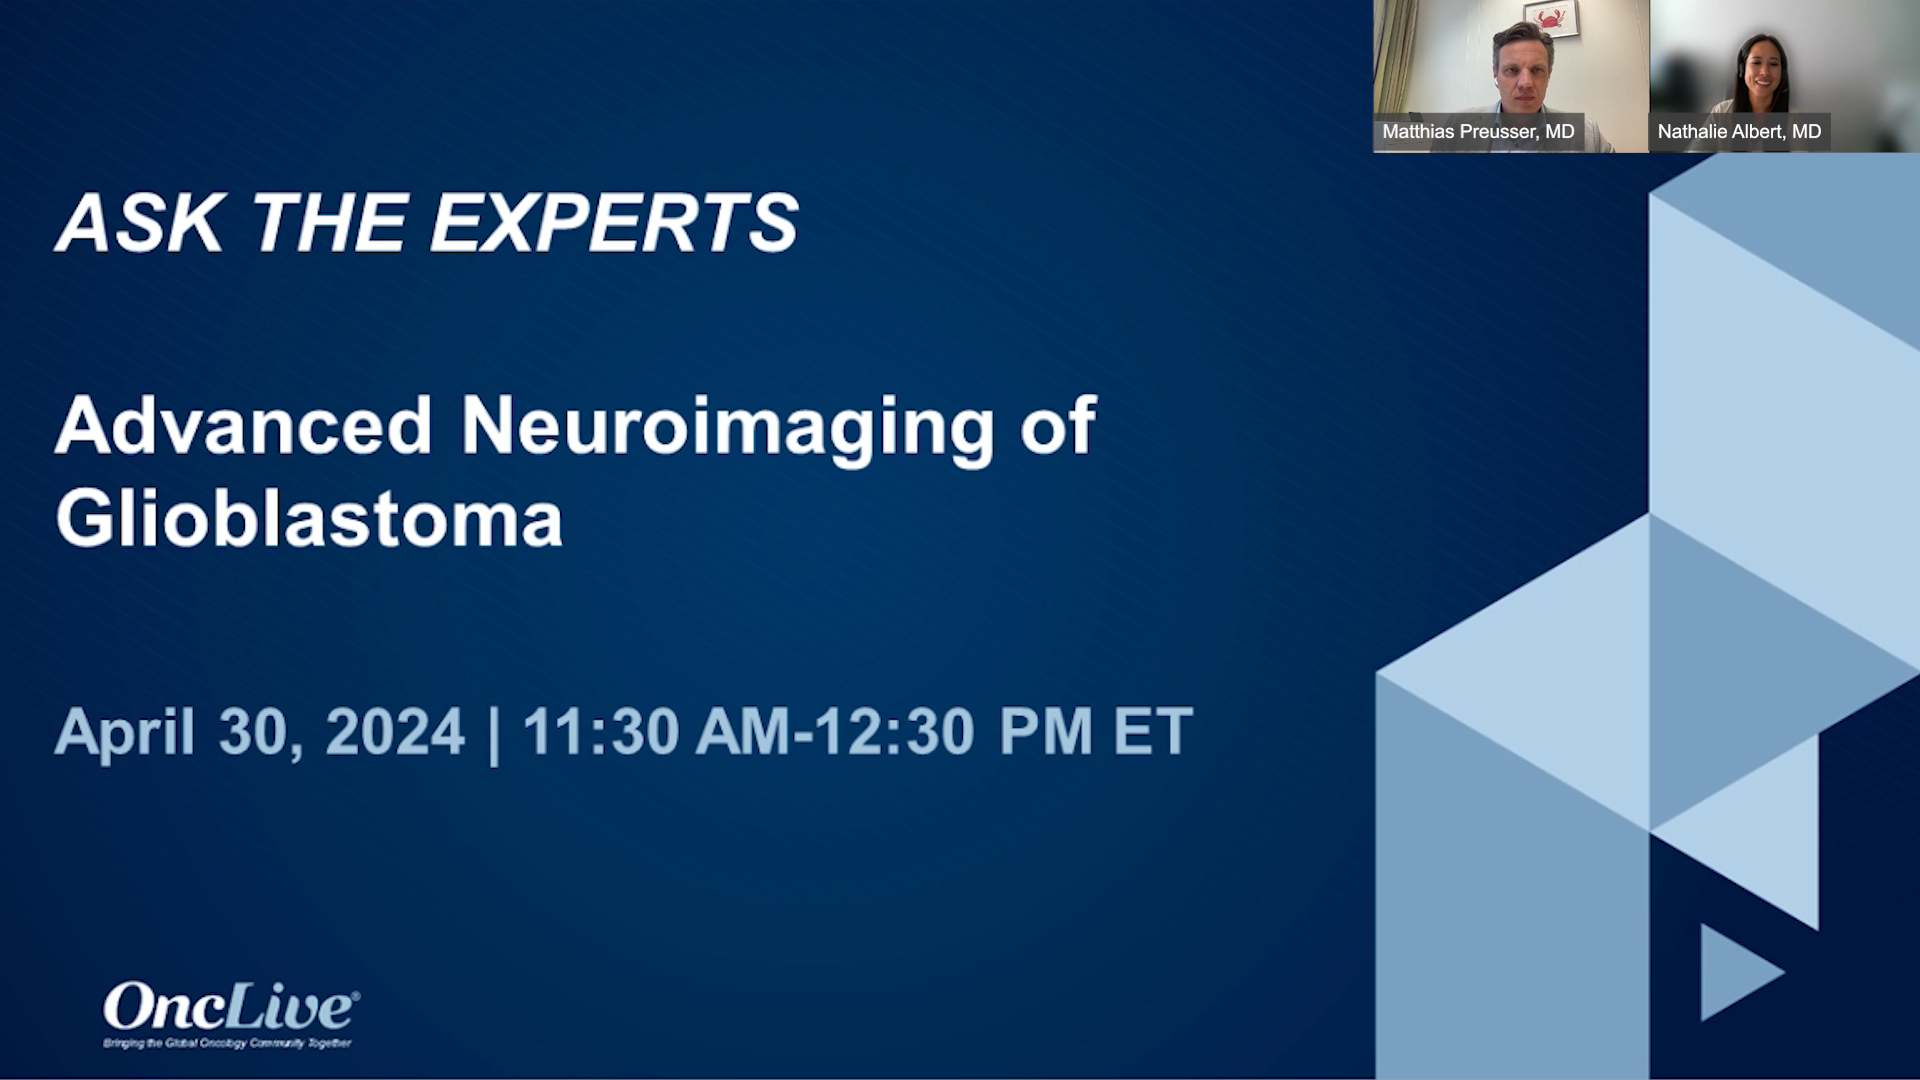 Video 8 - 2 KOLs featured in , "Q&A: Final Questions on Glioblastoma and Neuroimaging"